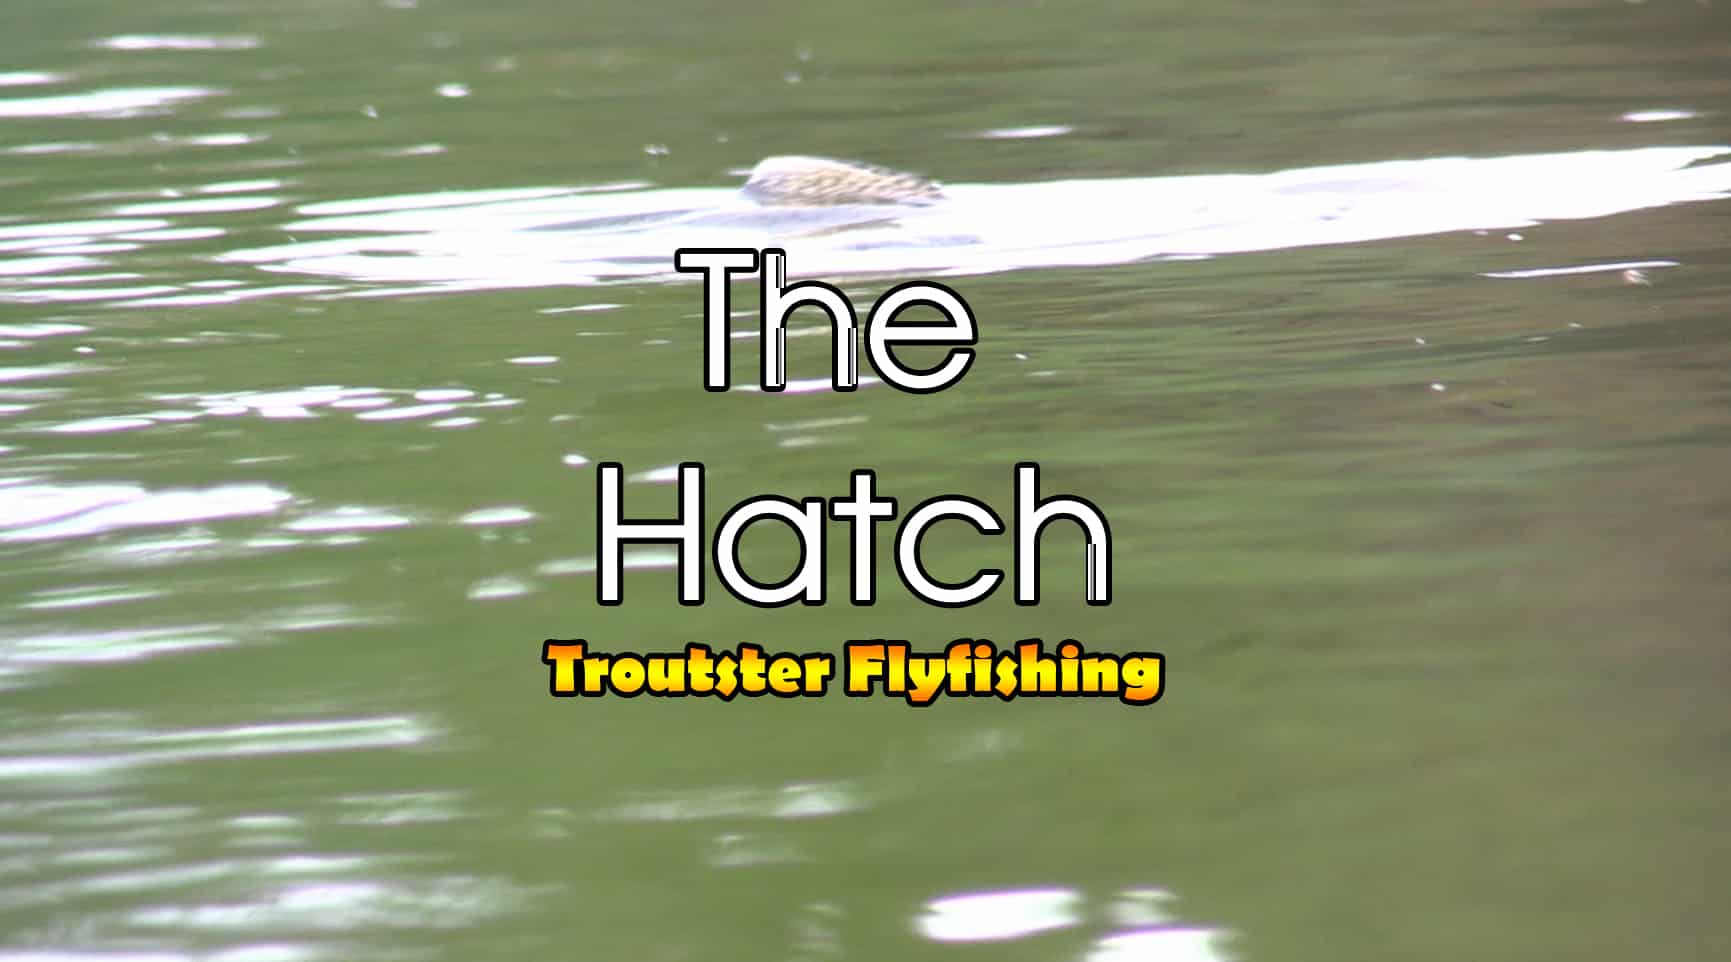 The mayfly hatch - big trout eating mayflies